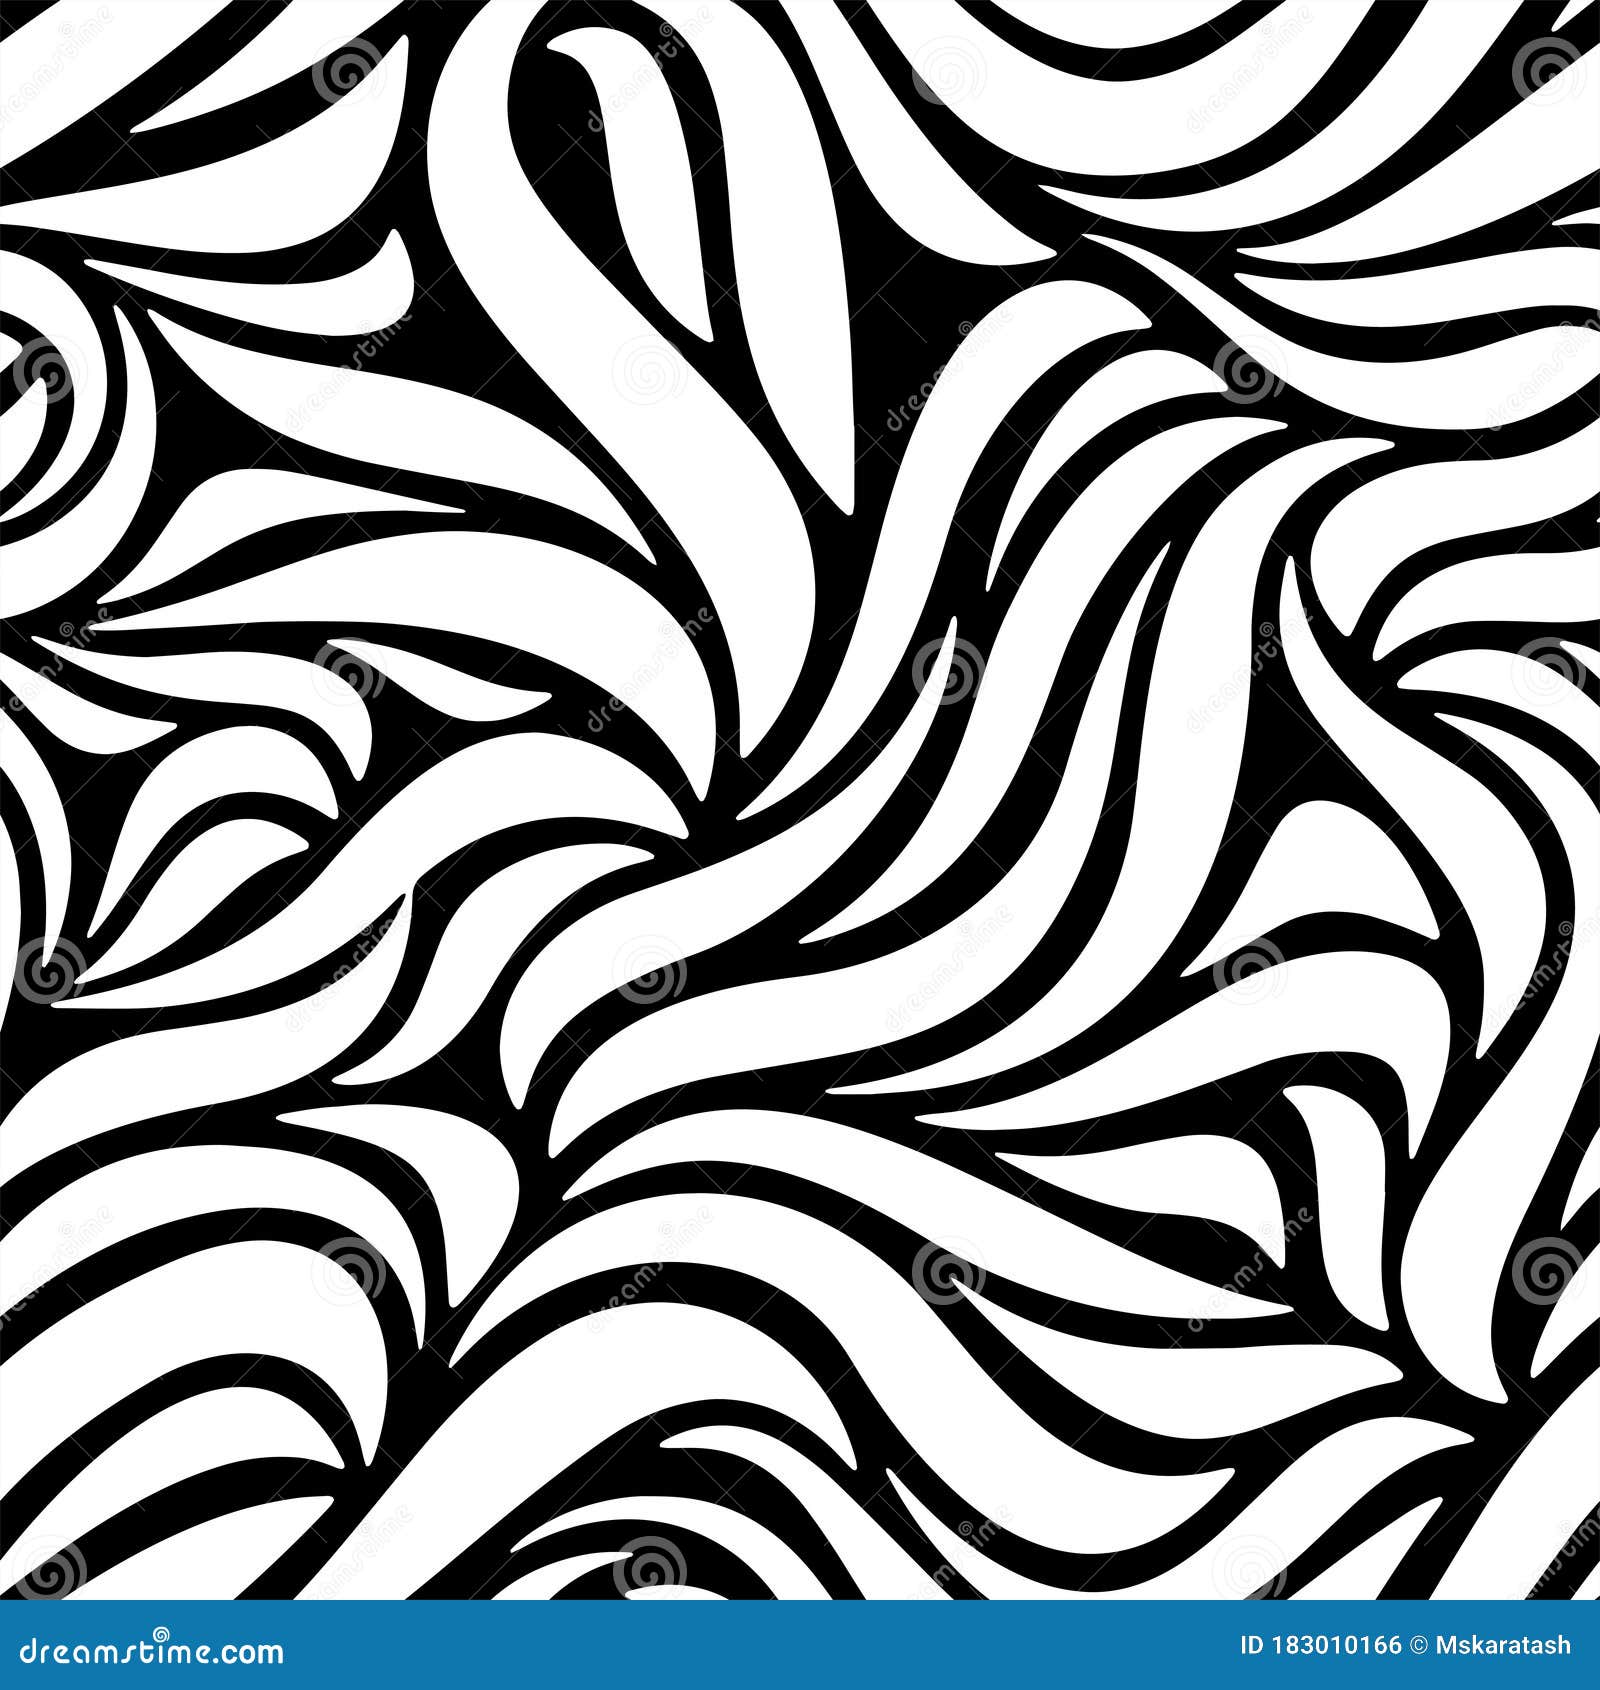 Full Seamless Abstract Ornamental Lines Pattern Black And White Curved